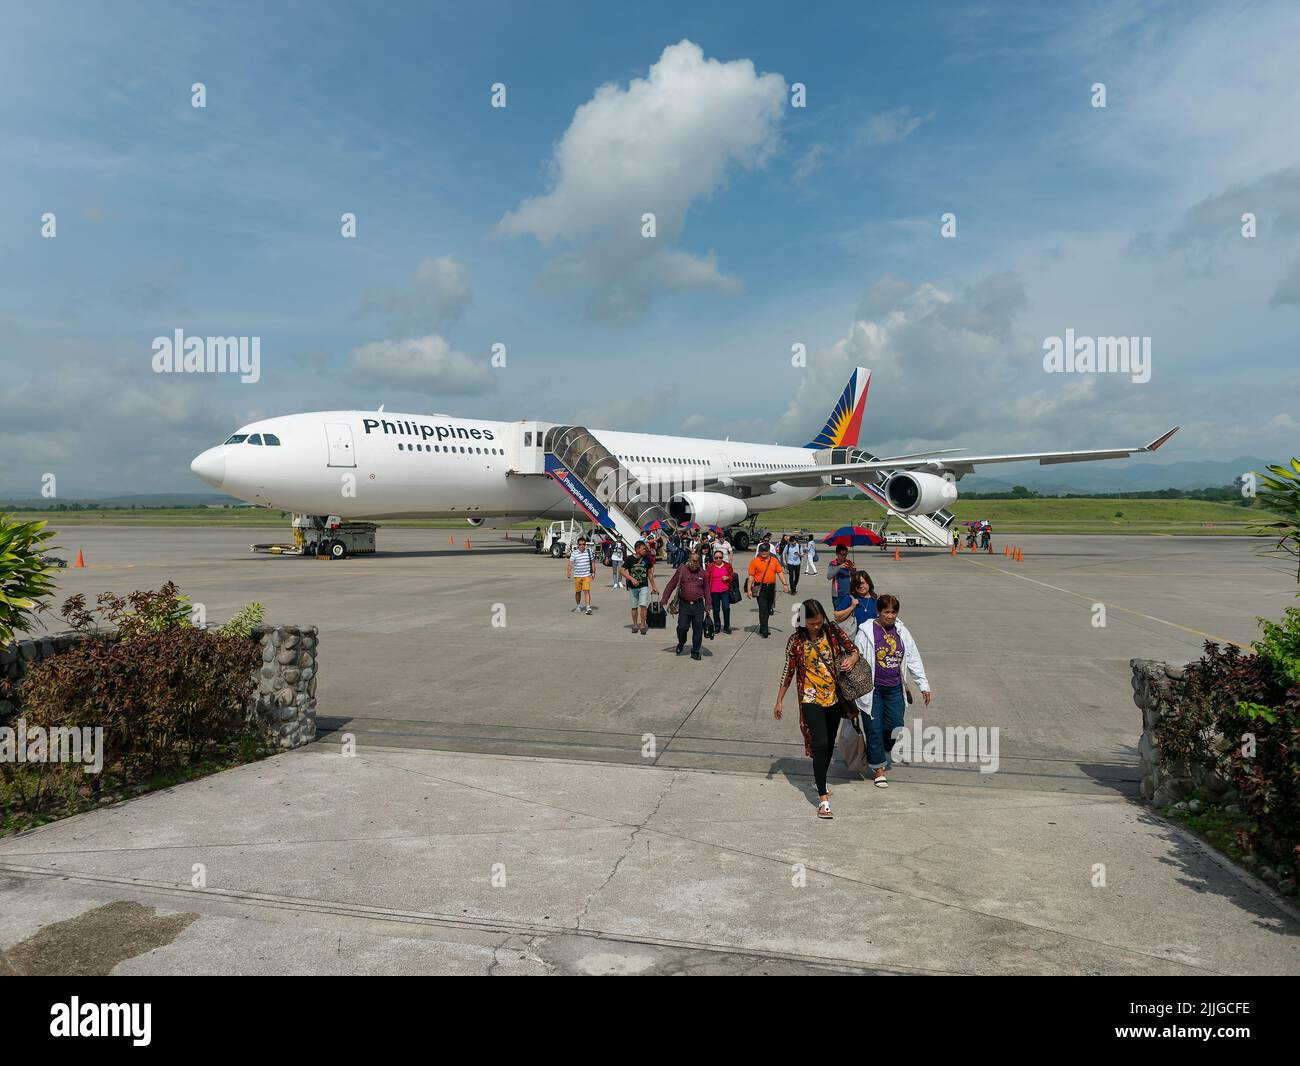 Philippine Airlines Airbus A340 after arrival at General Santos International Airport in South Cotabato on Mindanao, the southernmost major island of Stock Photo